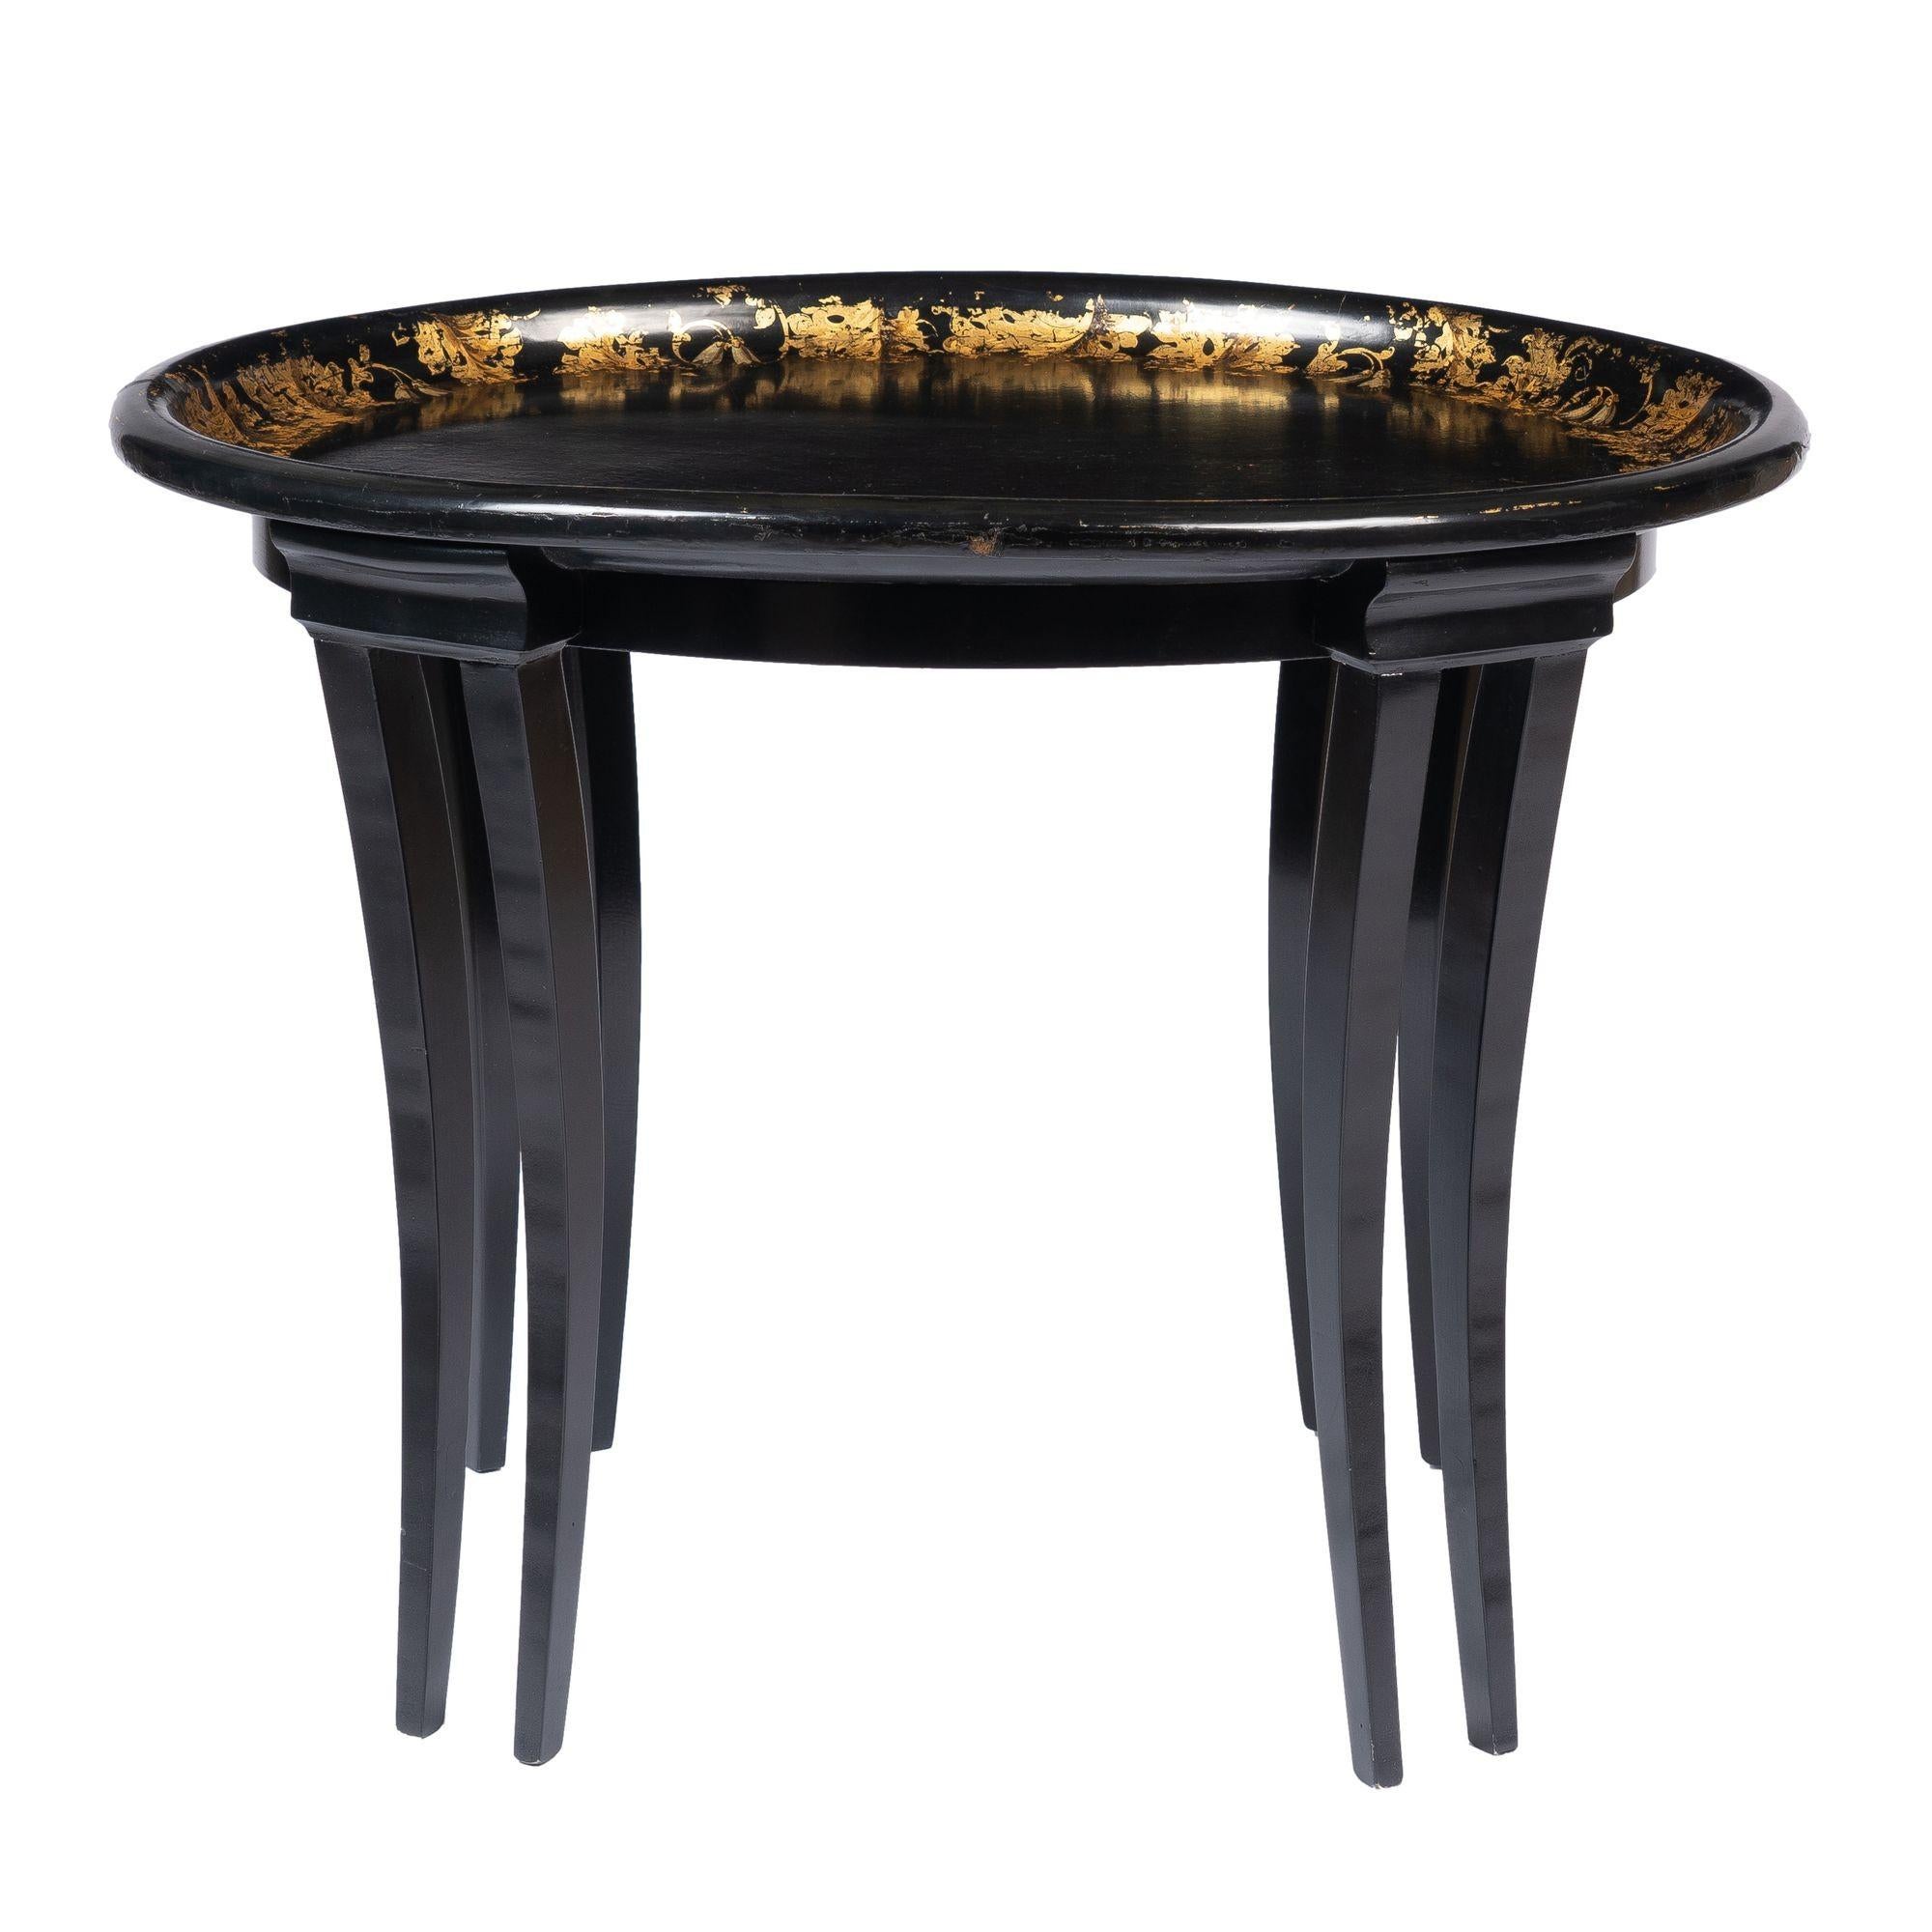 Oval black paper mache tray top coffee table with gold leaf border decoration, mounted on a custom sabre leg stand with conforming apron.

England, circa 1835.